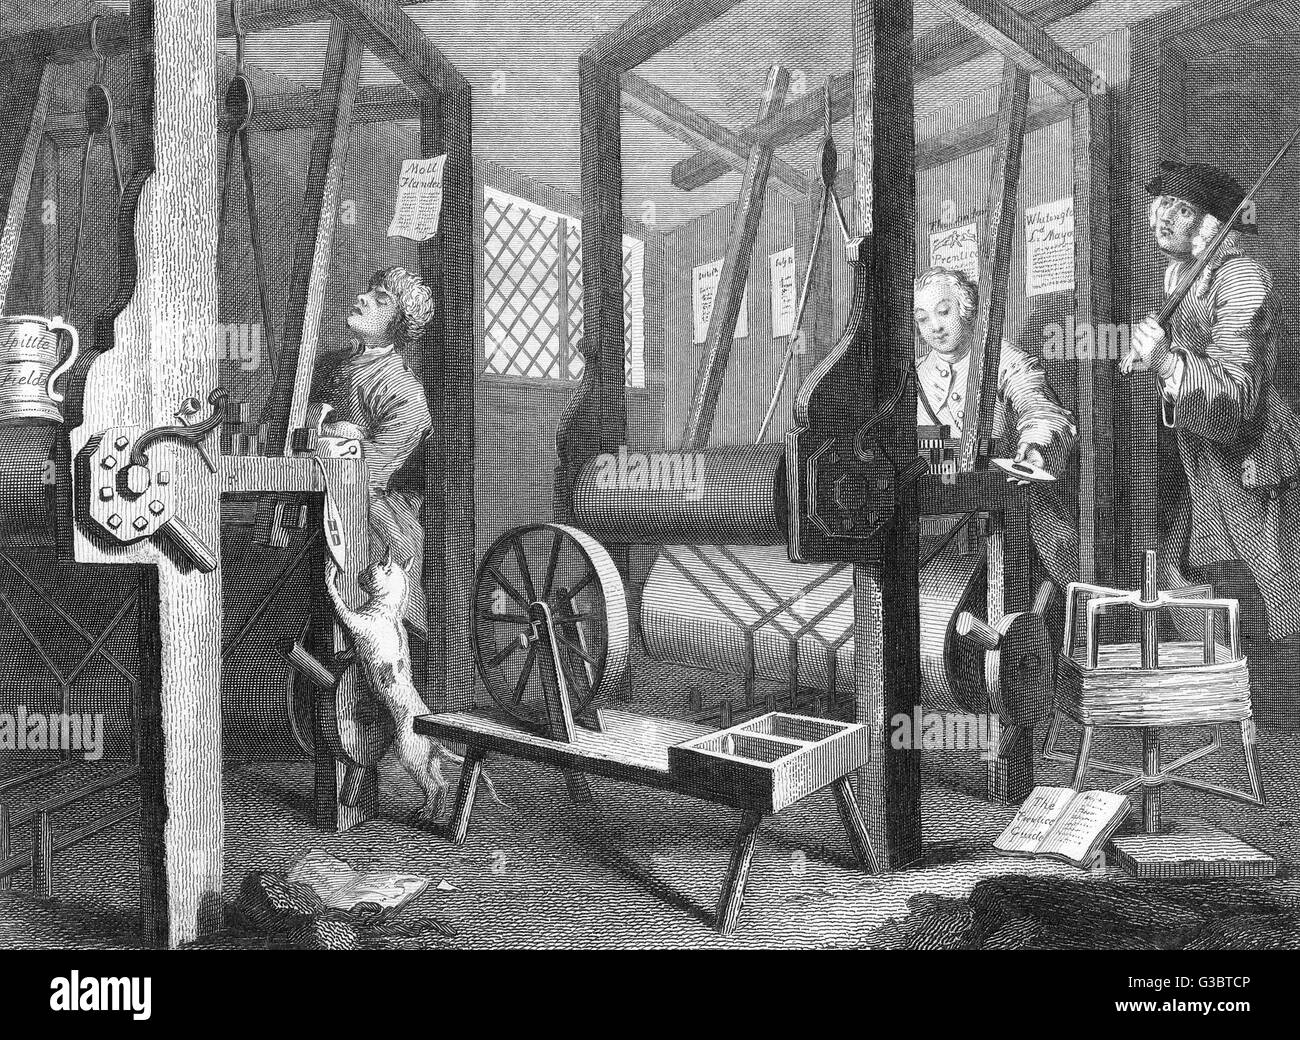 Industry and Idleness by William Hogarth, showing weaving at Spitalfields, England, contrasting the discipline of one apprentice with the slovenly behaviour of another.     Date: First published 1747 Stock Photo